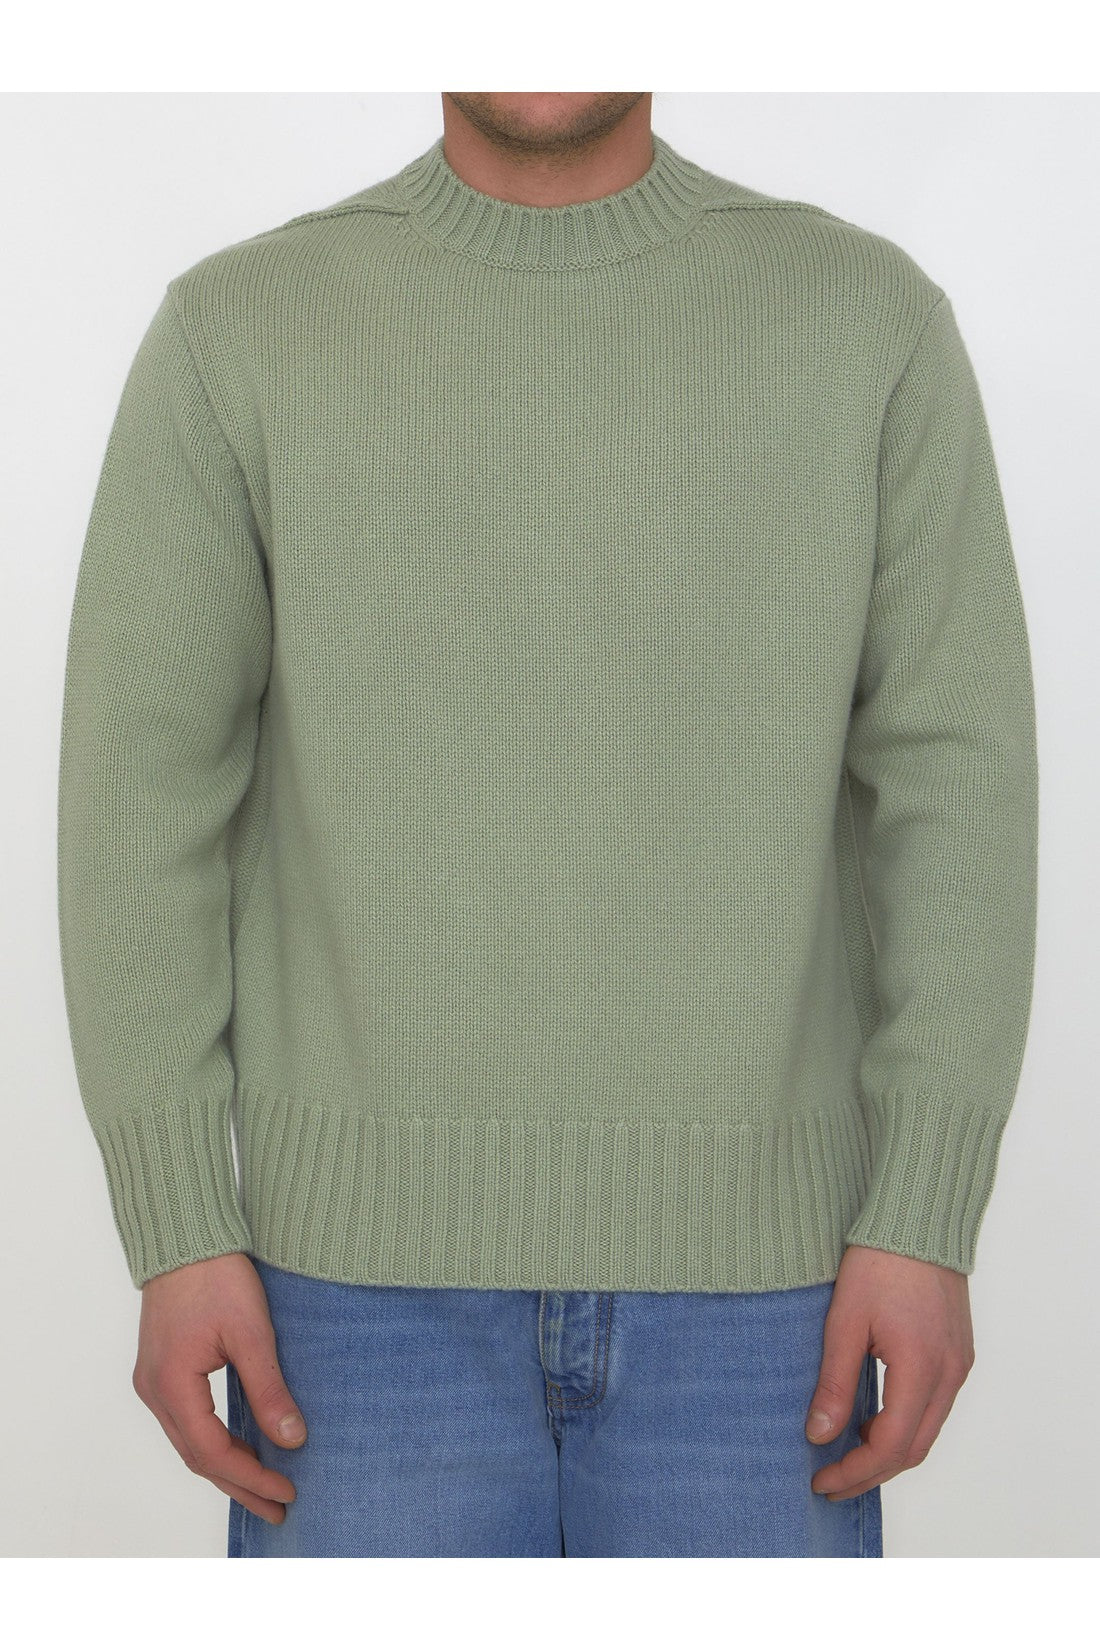 Green cashmere sweater